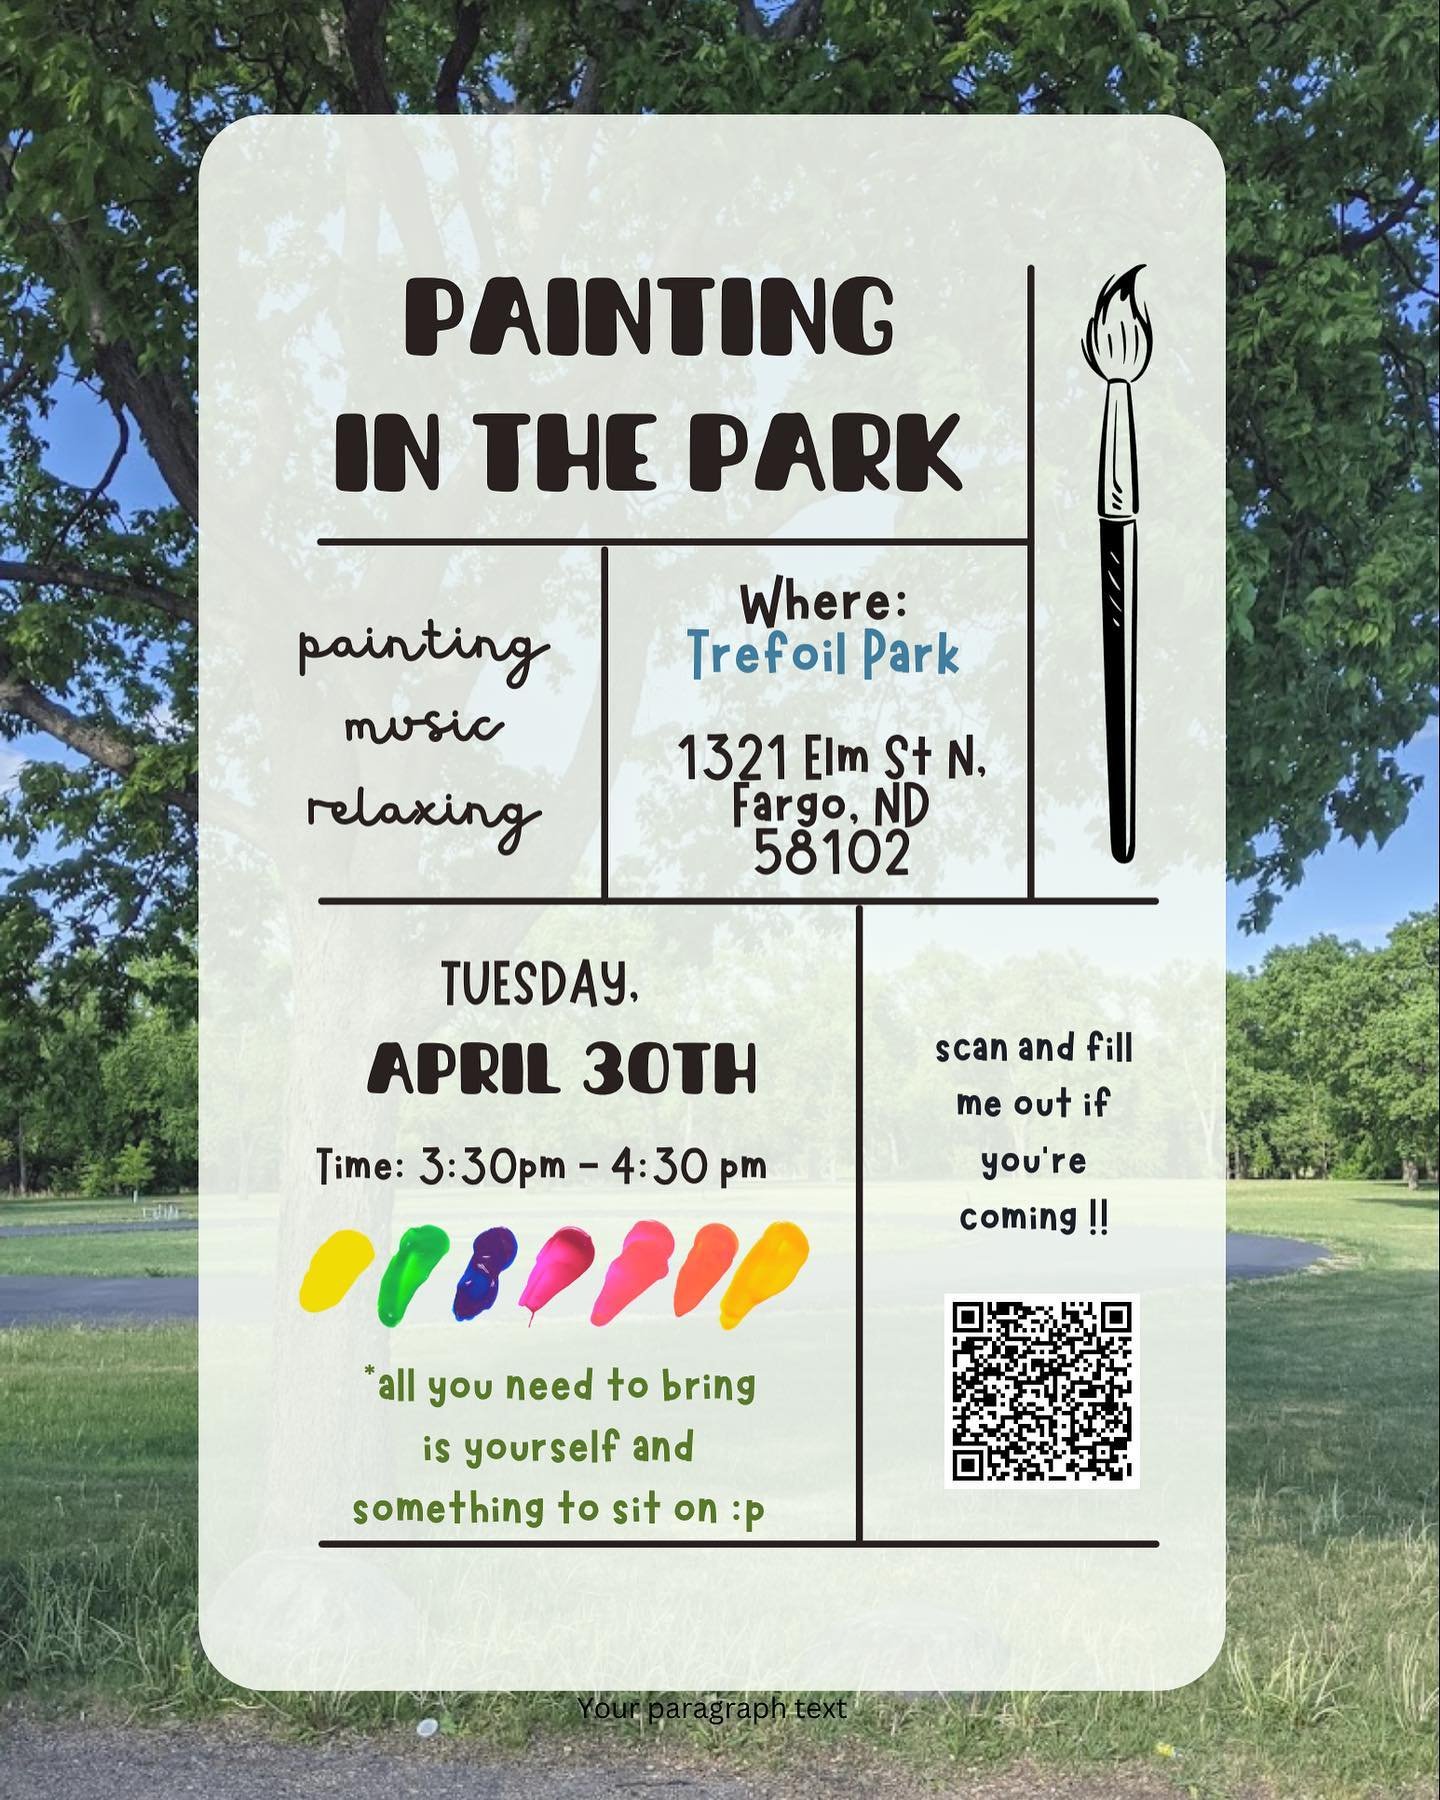 Need an hour to chill out, paint, and listen to some good tunes, stop by Trefoil Park with @kaylyn_haug around 3:30-4:30 on April 30th!

I will have painting materials provided, so all you need to bring is your beautiful self 🫶🏻

Don&rsquo;t forget